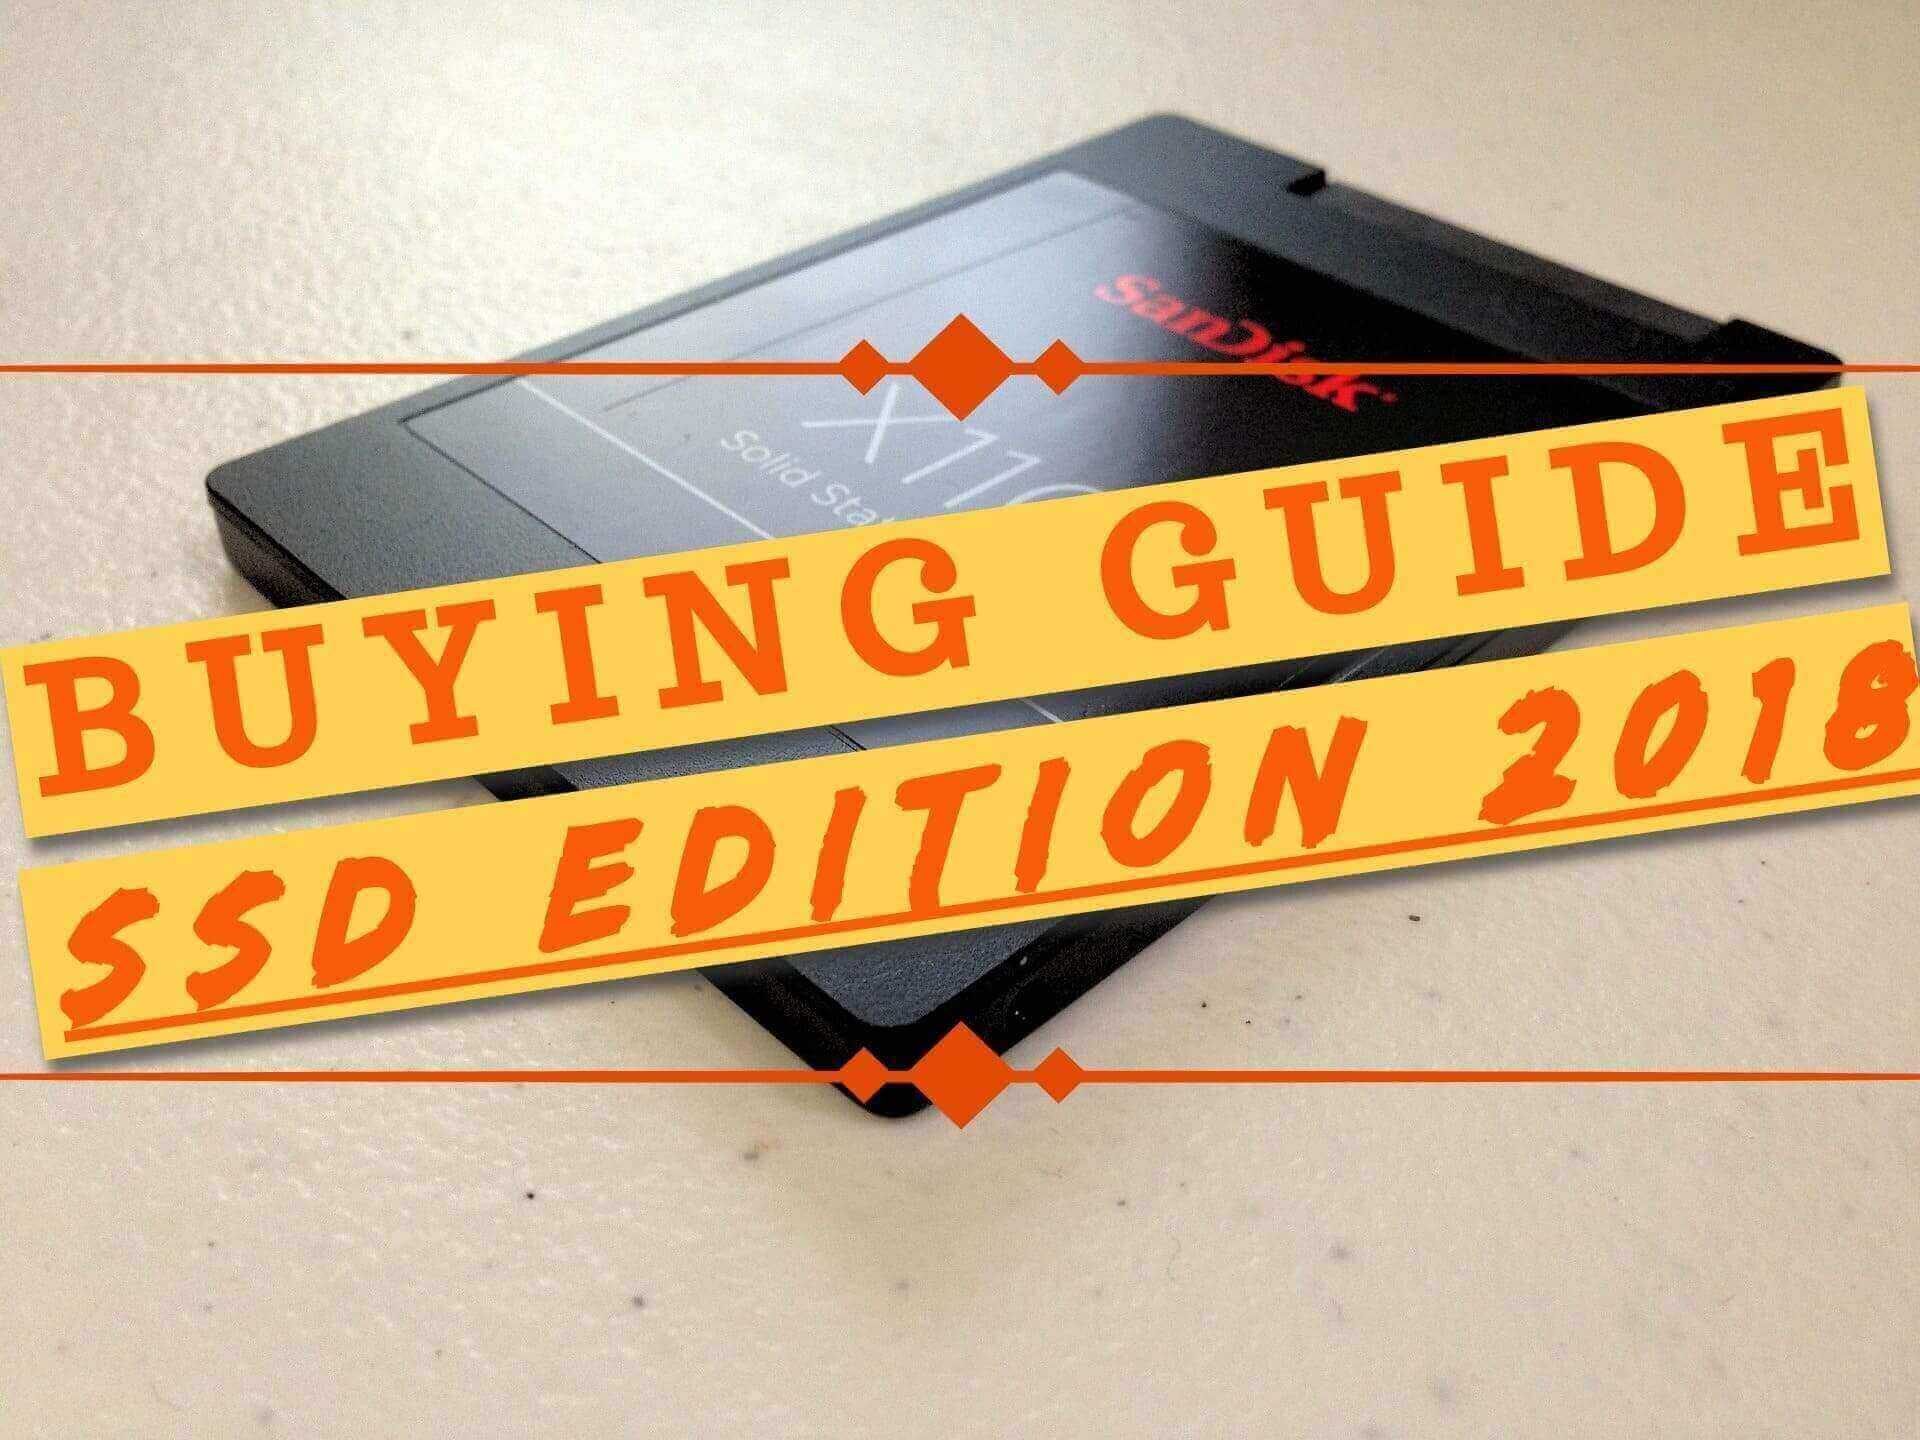 Buying Guide - SSD Edition